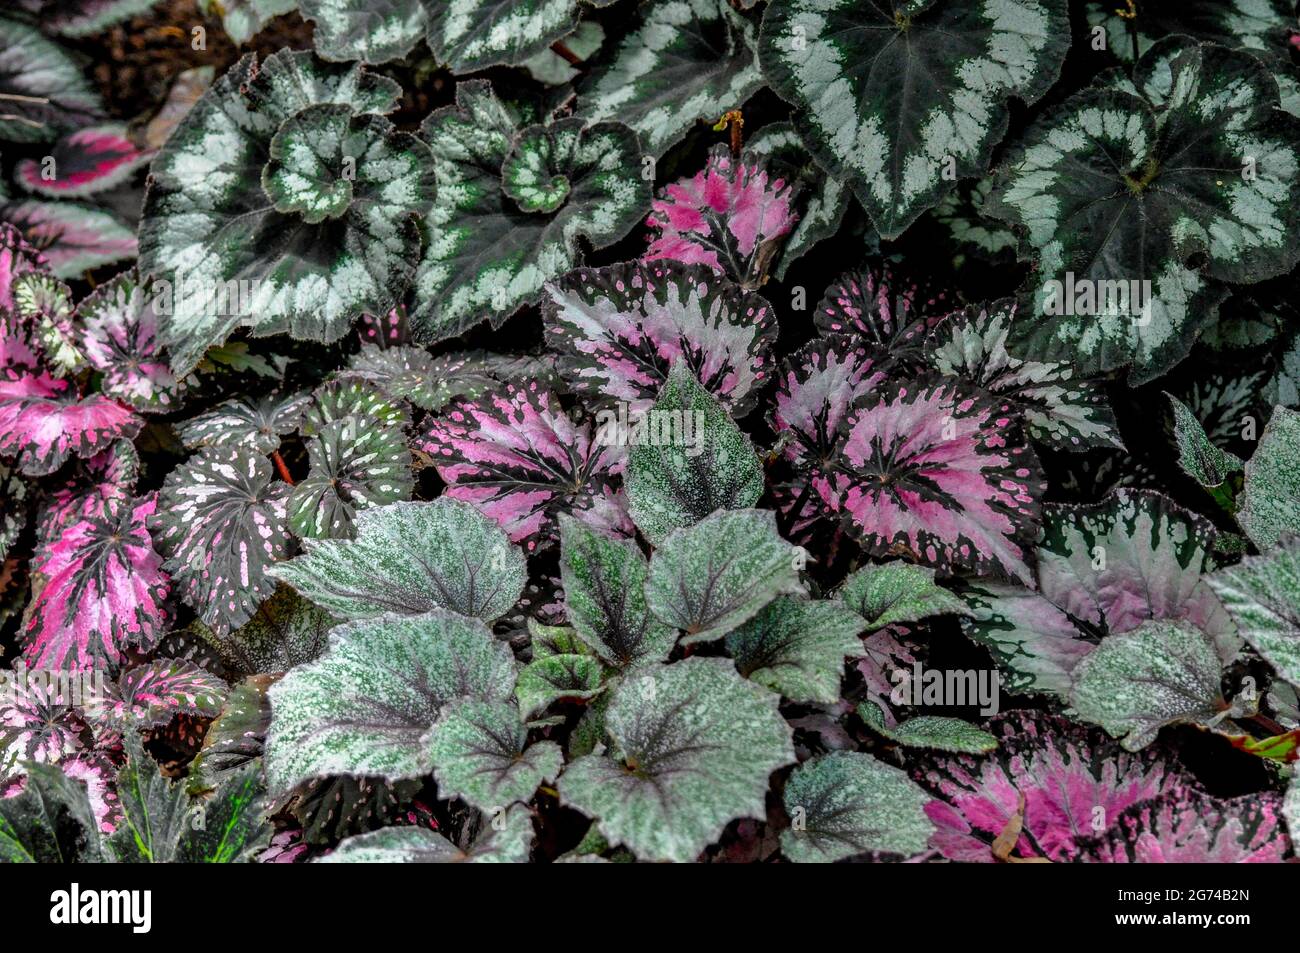 A closeup image of Royal Begonia pink and green plants with black contour and big leaves growing next to each other Stock Photo